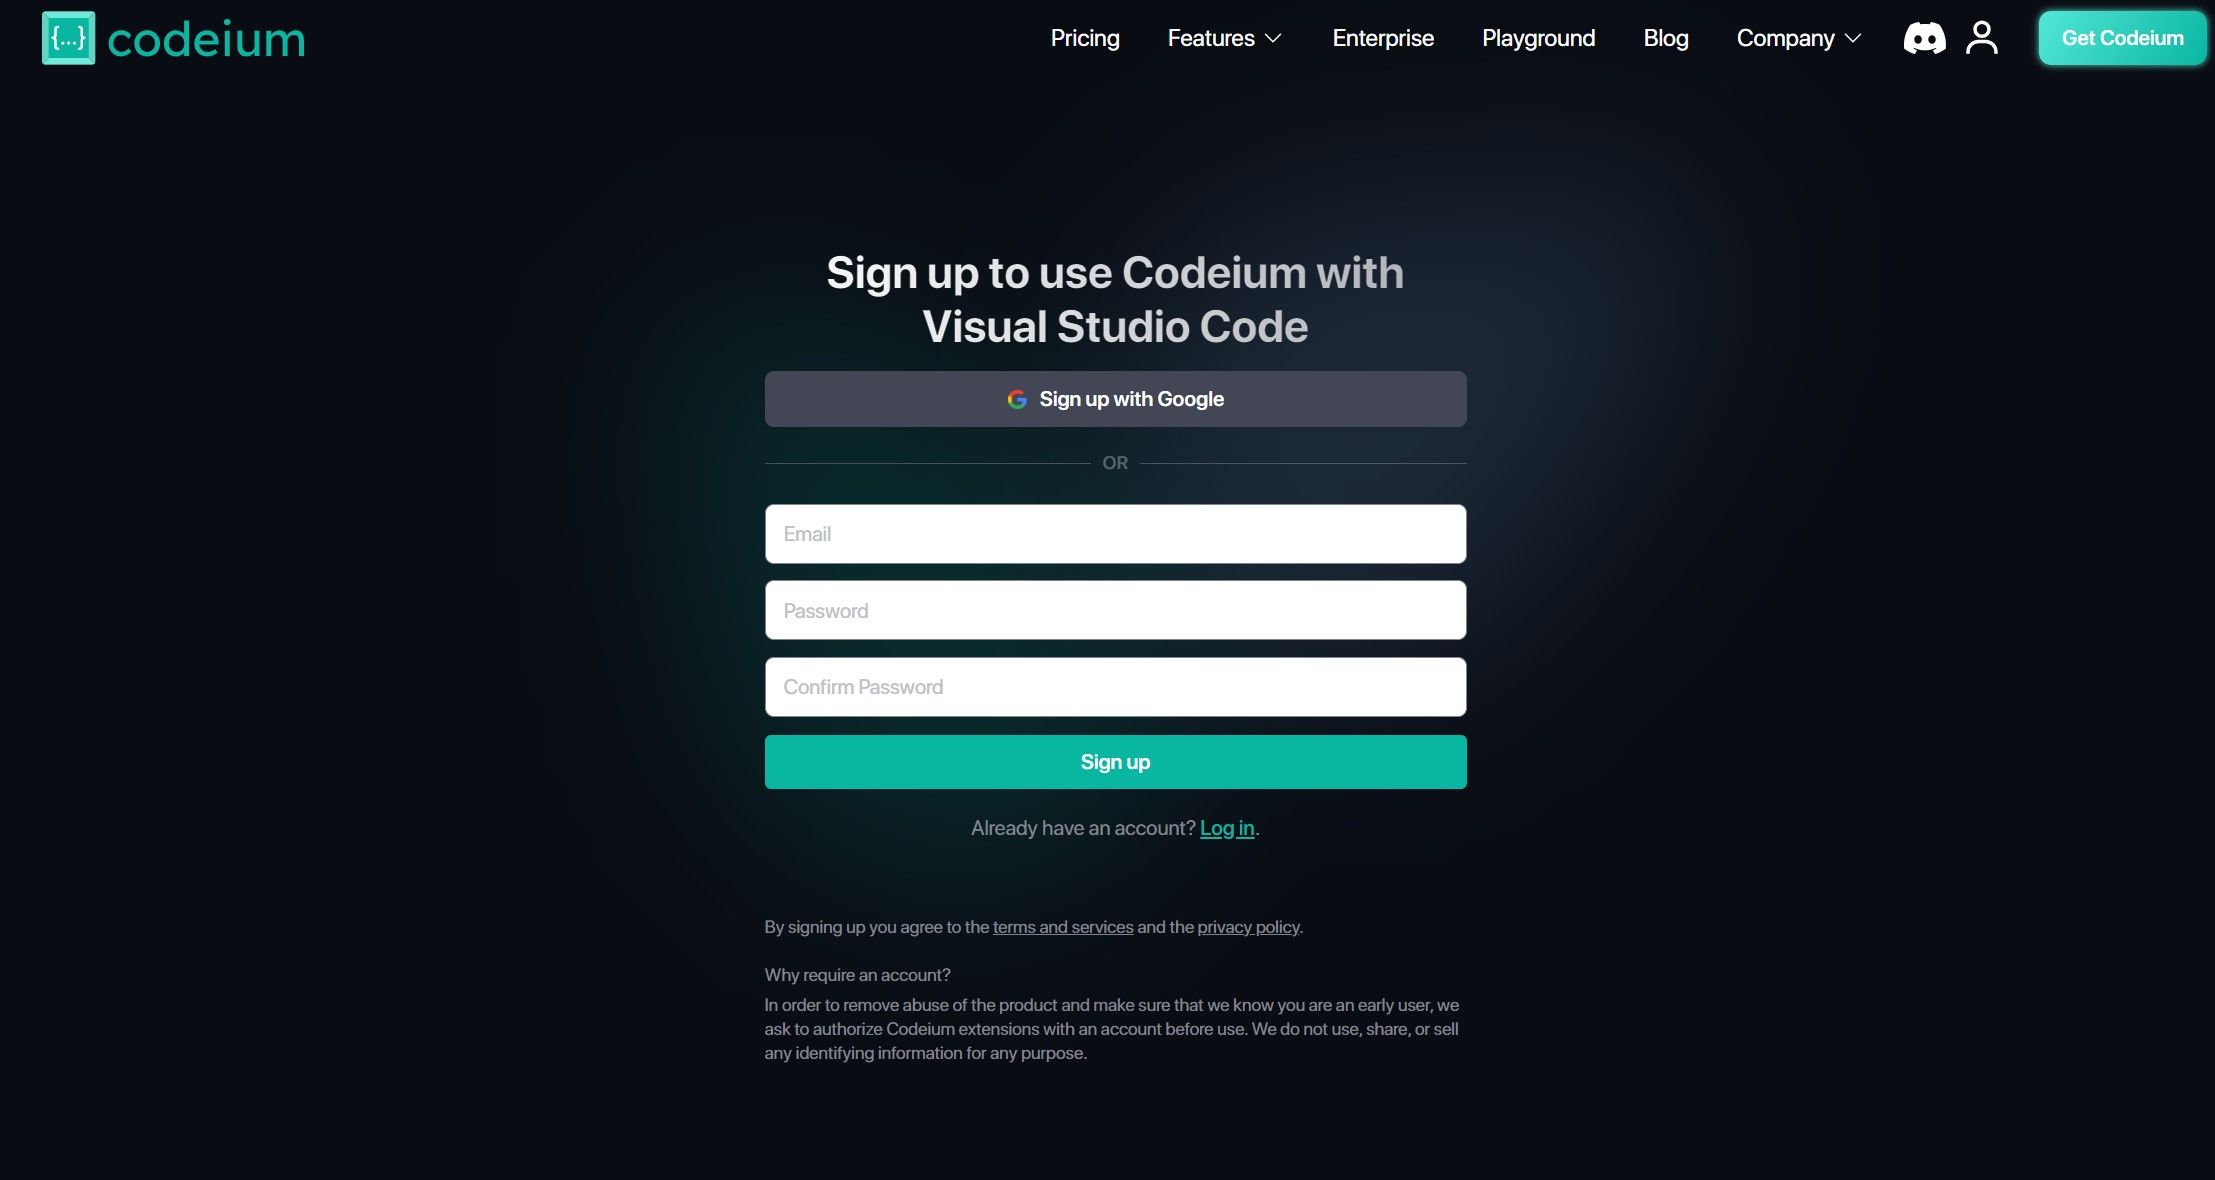 Codeium sign up page on the web